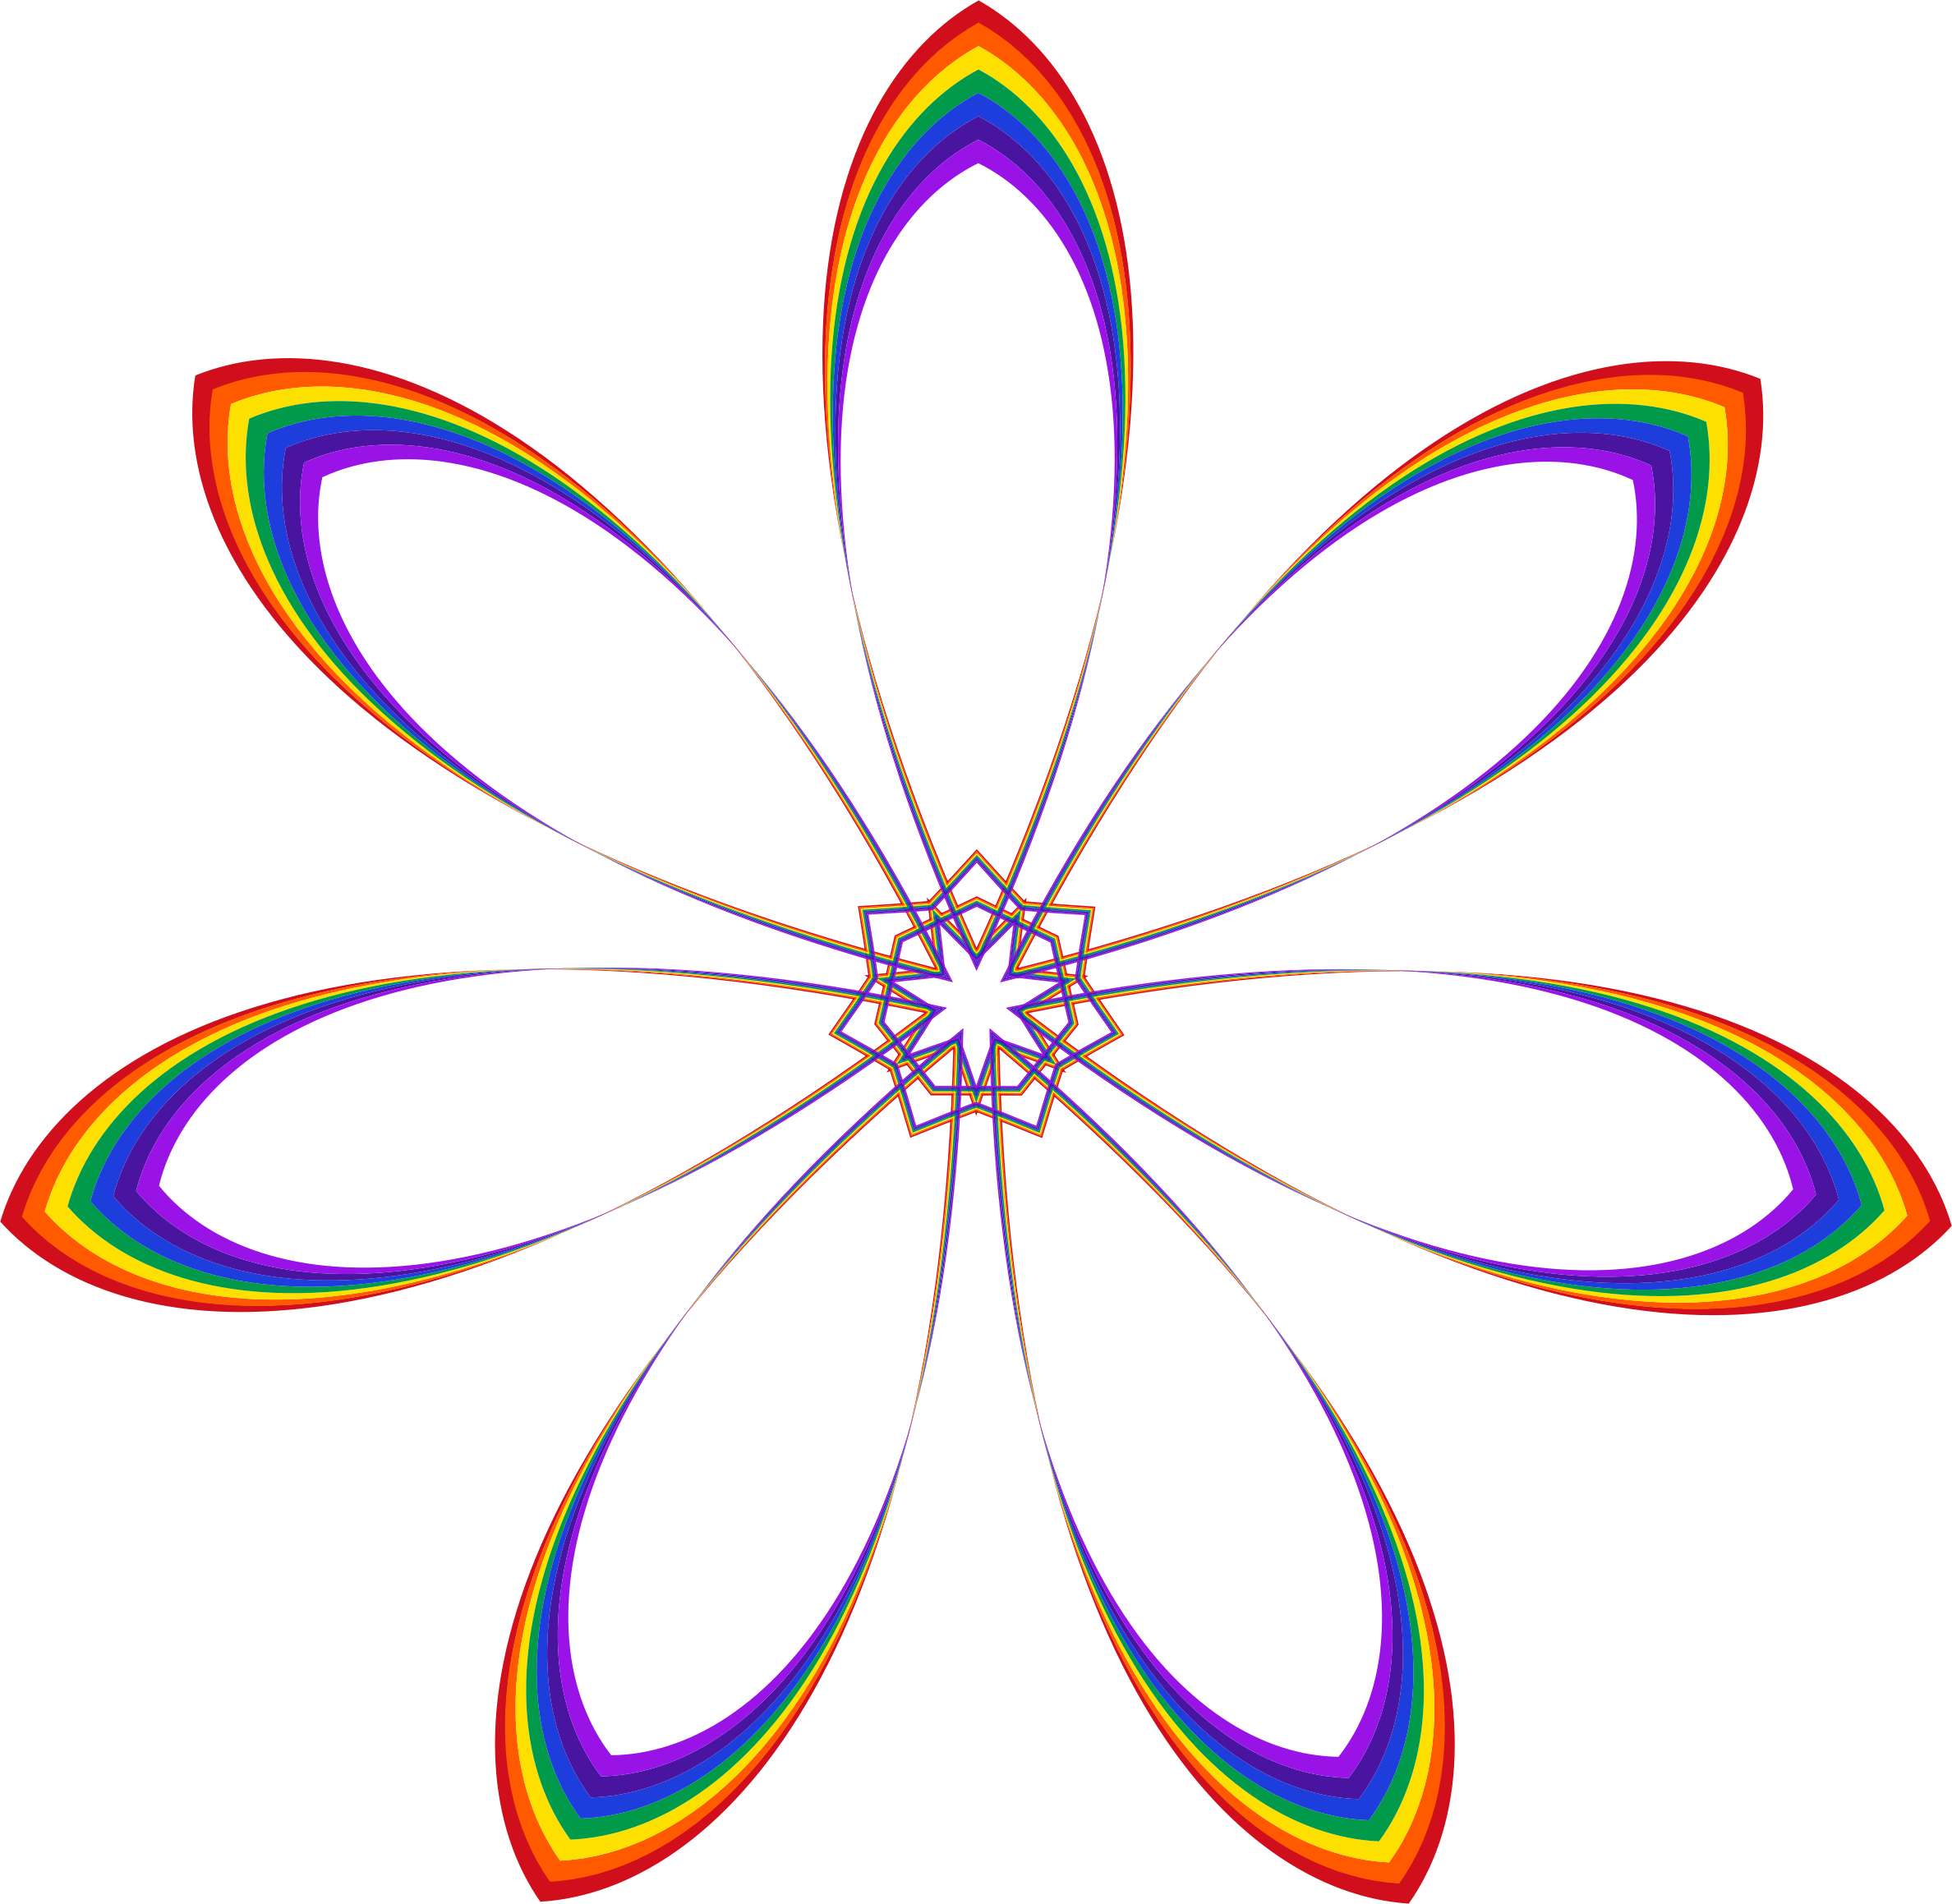 Clip Arts Related To : rainbow circle clipart. view all Rainbow Flower Cl.....